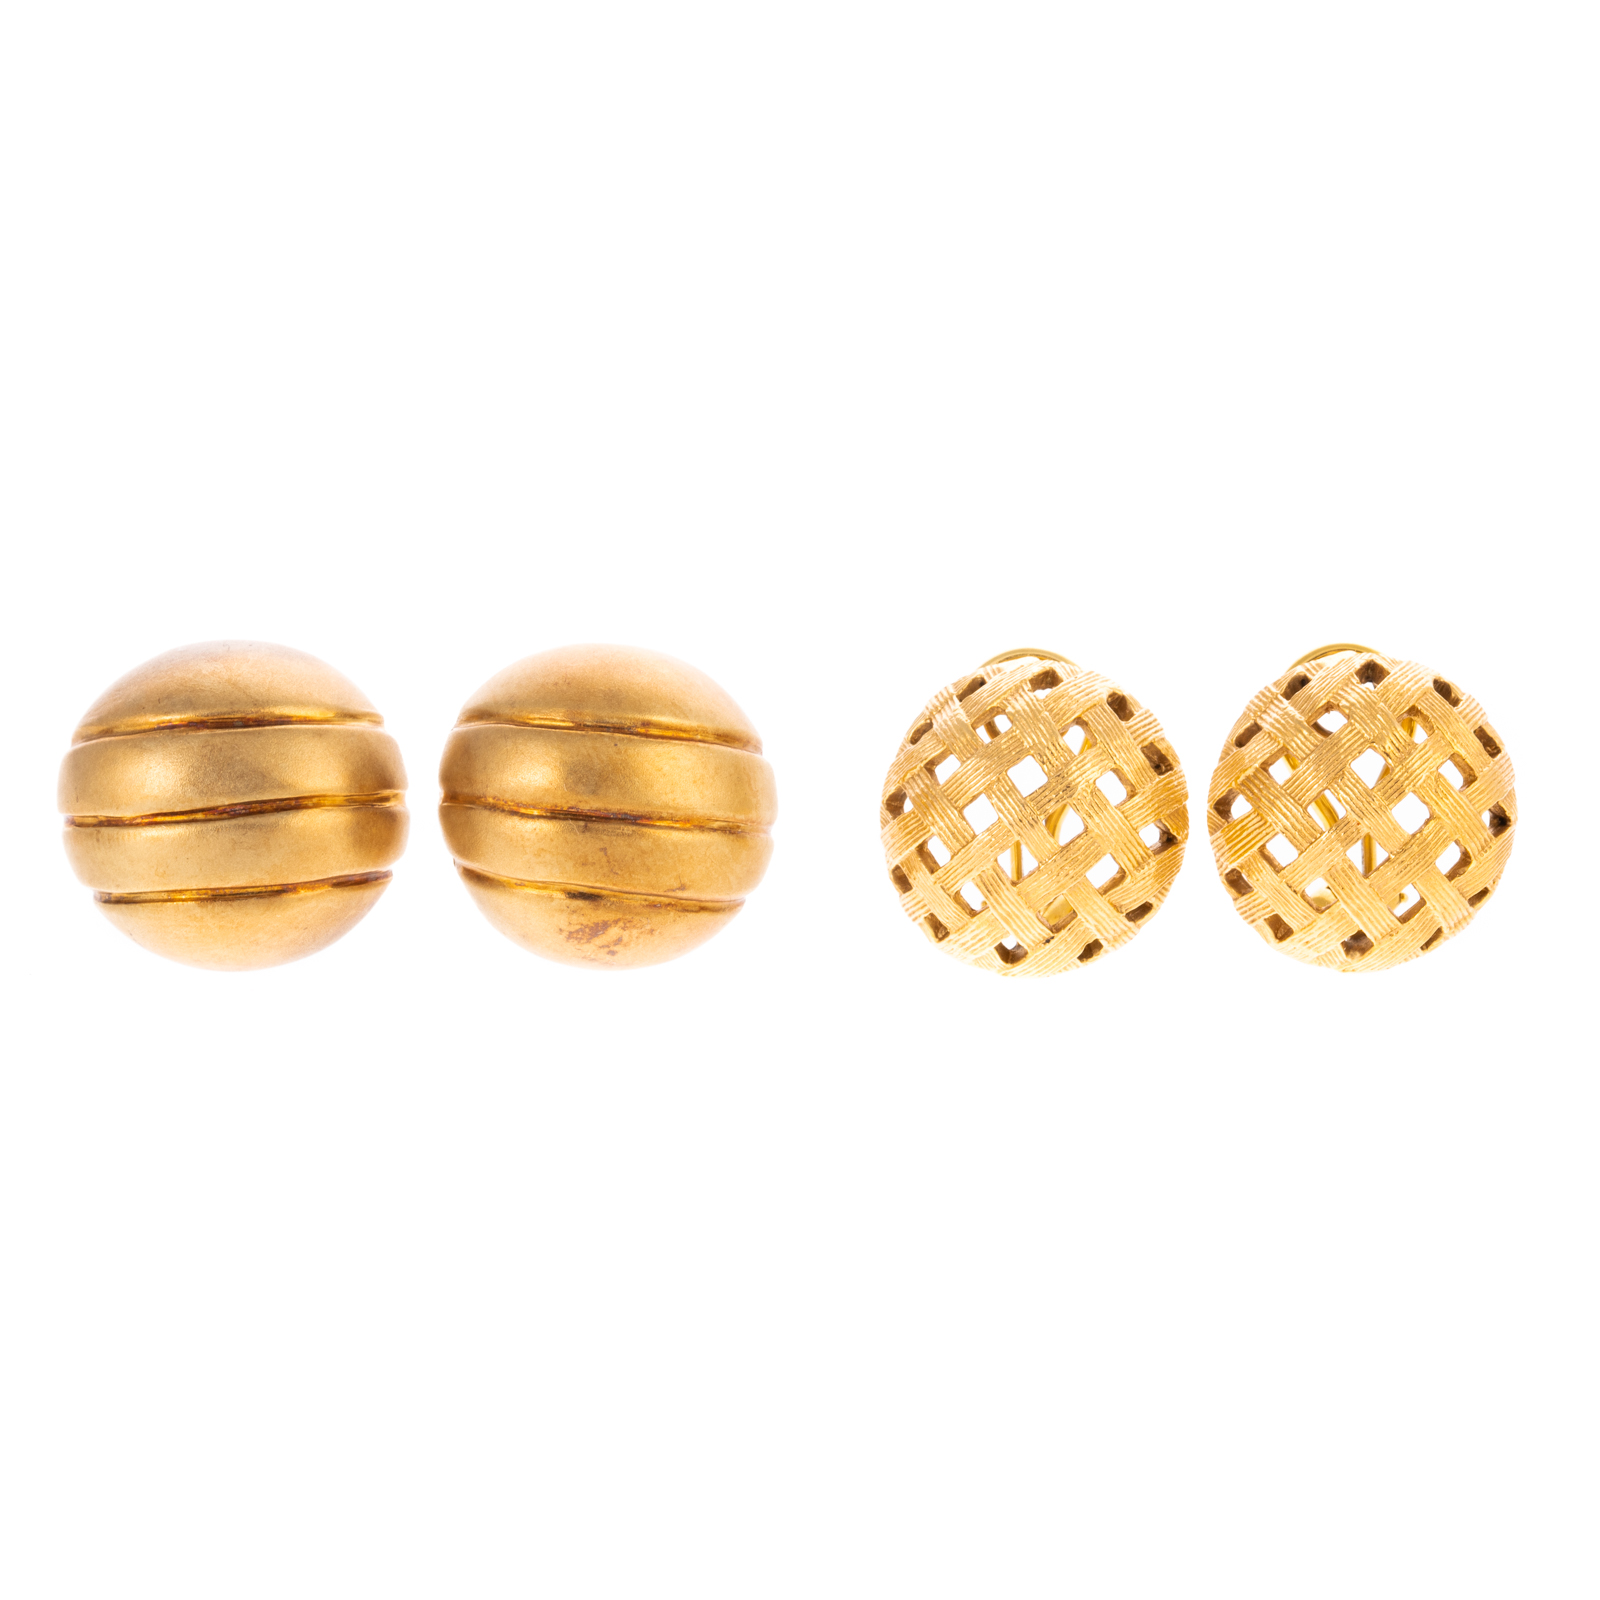 TWO PAIRS OF DOME EARRINGS IN 18K 338574